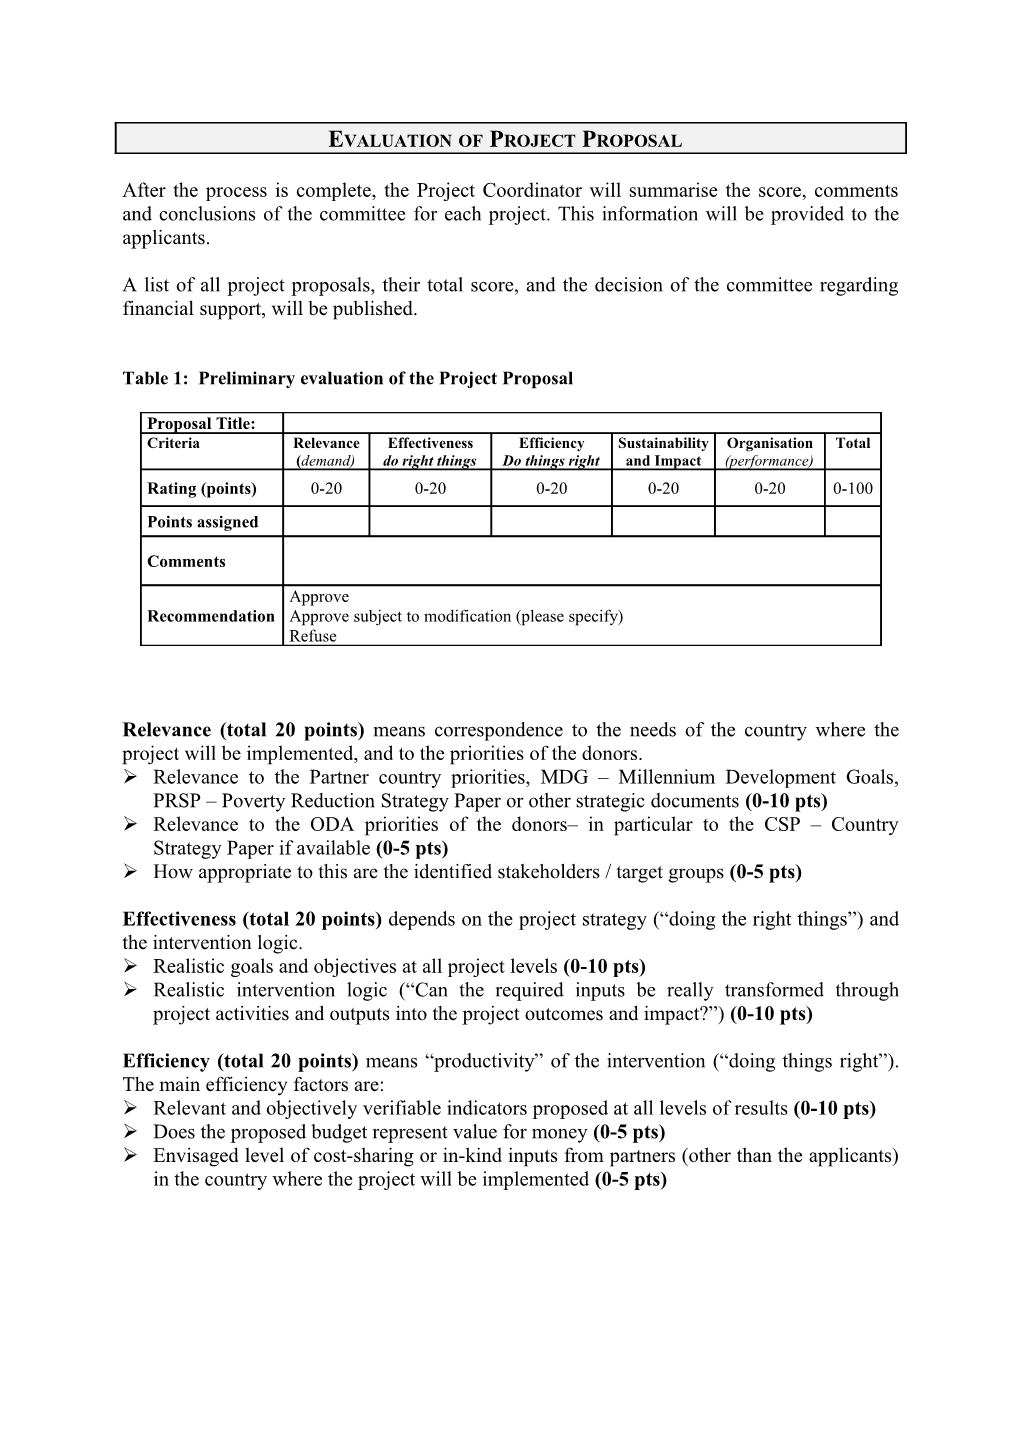 Appraisal Criteria for Project Proposals